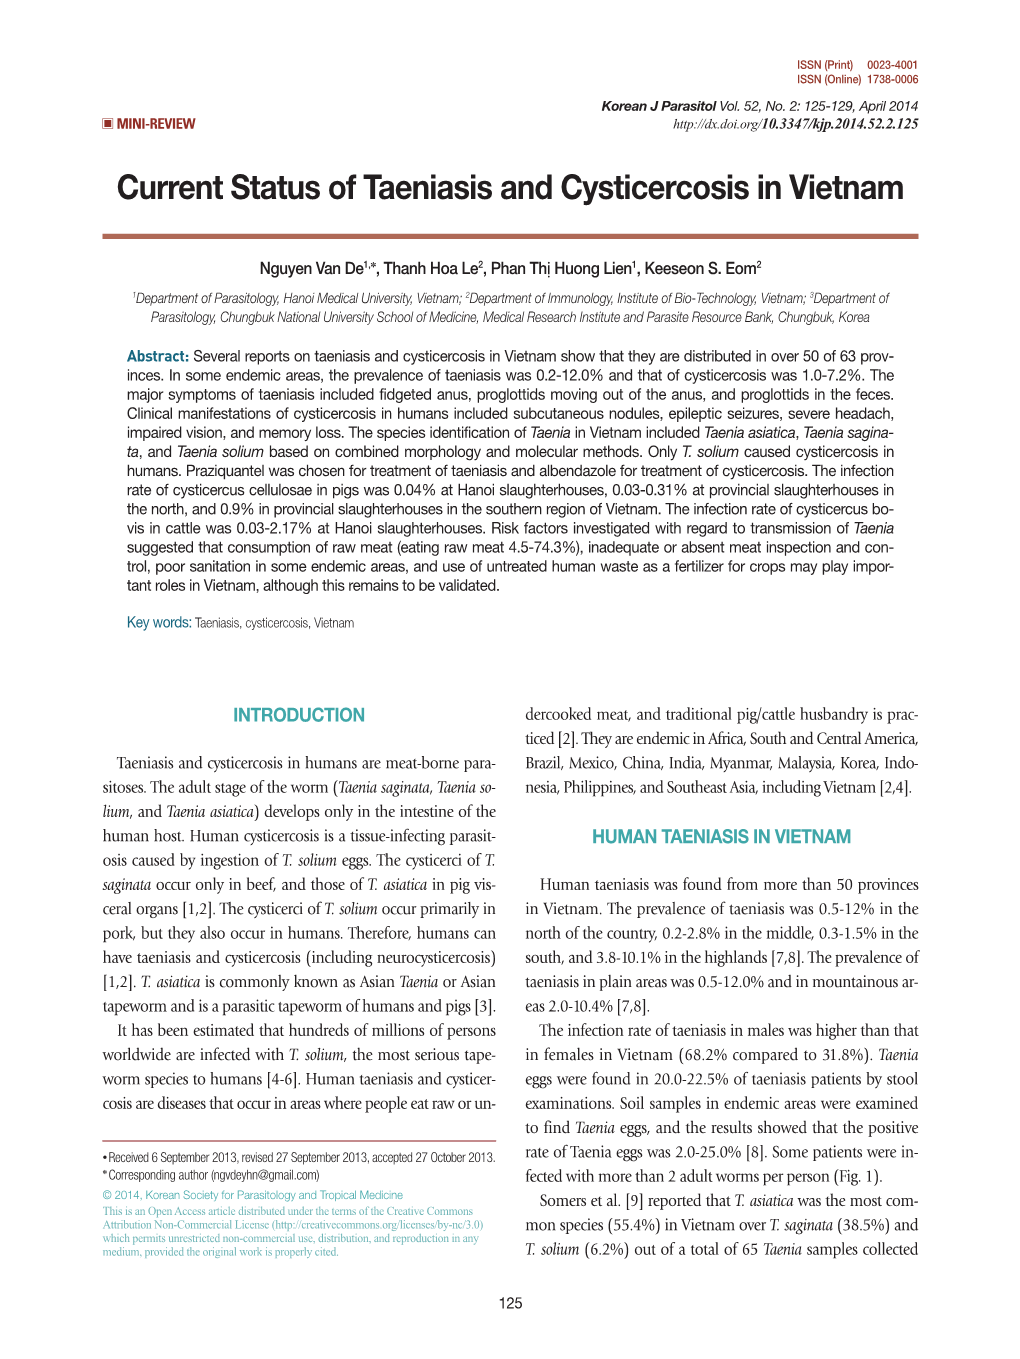 Current Status of Taeniasis and Cysticercosis in Vietnam